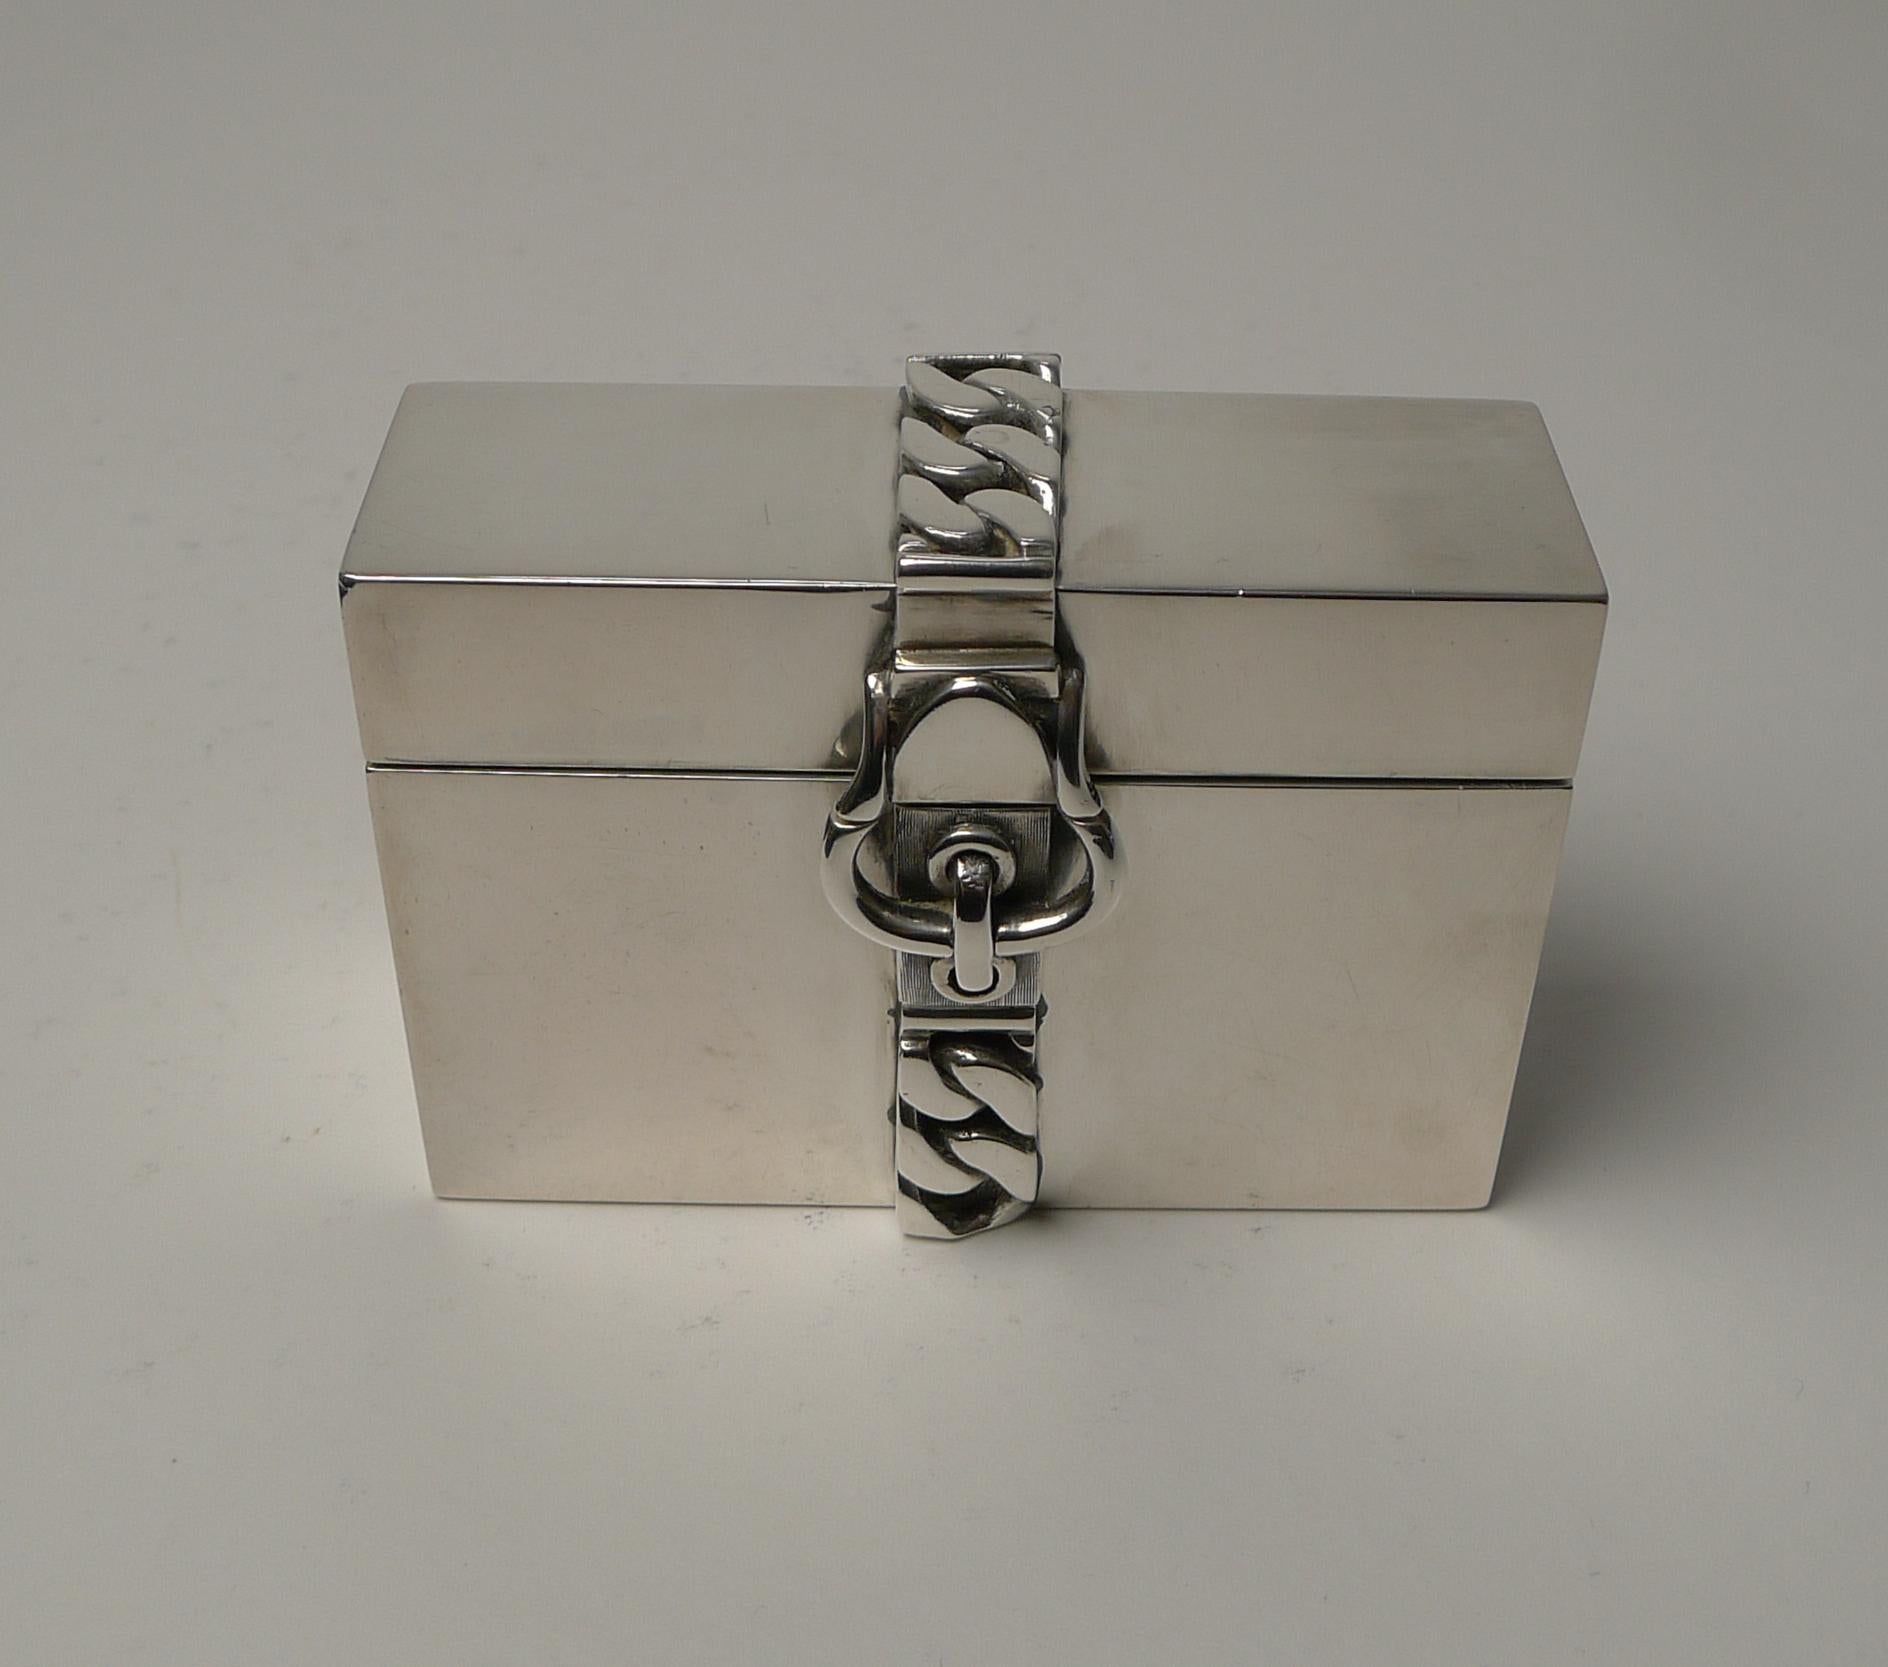 Hefty Italian silver was used to create this mid-century modern box with a stylish cast silver chain belt and buckle across the top and down the front, beautiful quality and engineering.

The lid when opened reveals a fitted interior accommodating